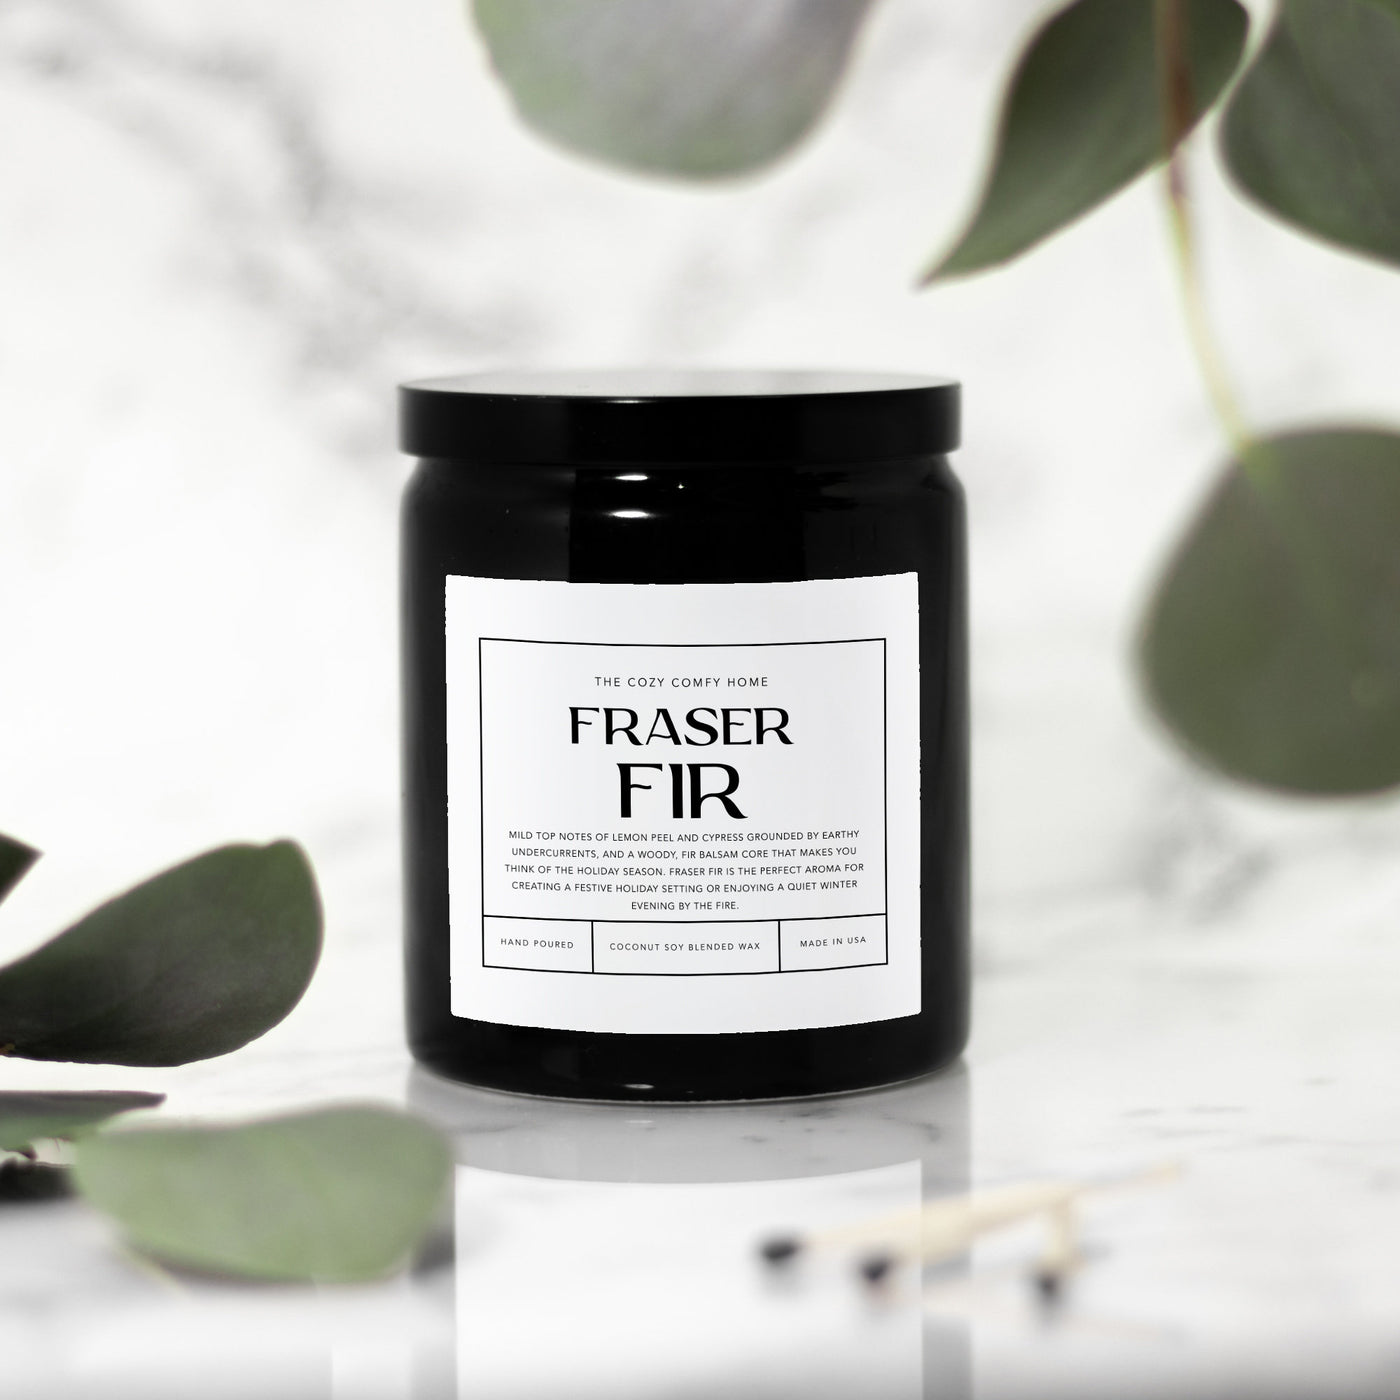 Fraser Fir hand poured candle, Scented Nontoxic Candle, 8 oz coconut soy wax candle, Black or White ceramic jar, Wholesale Available